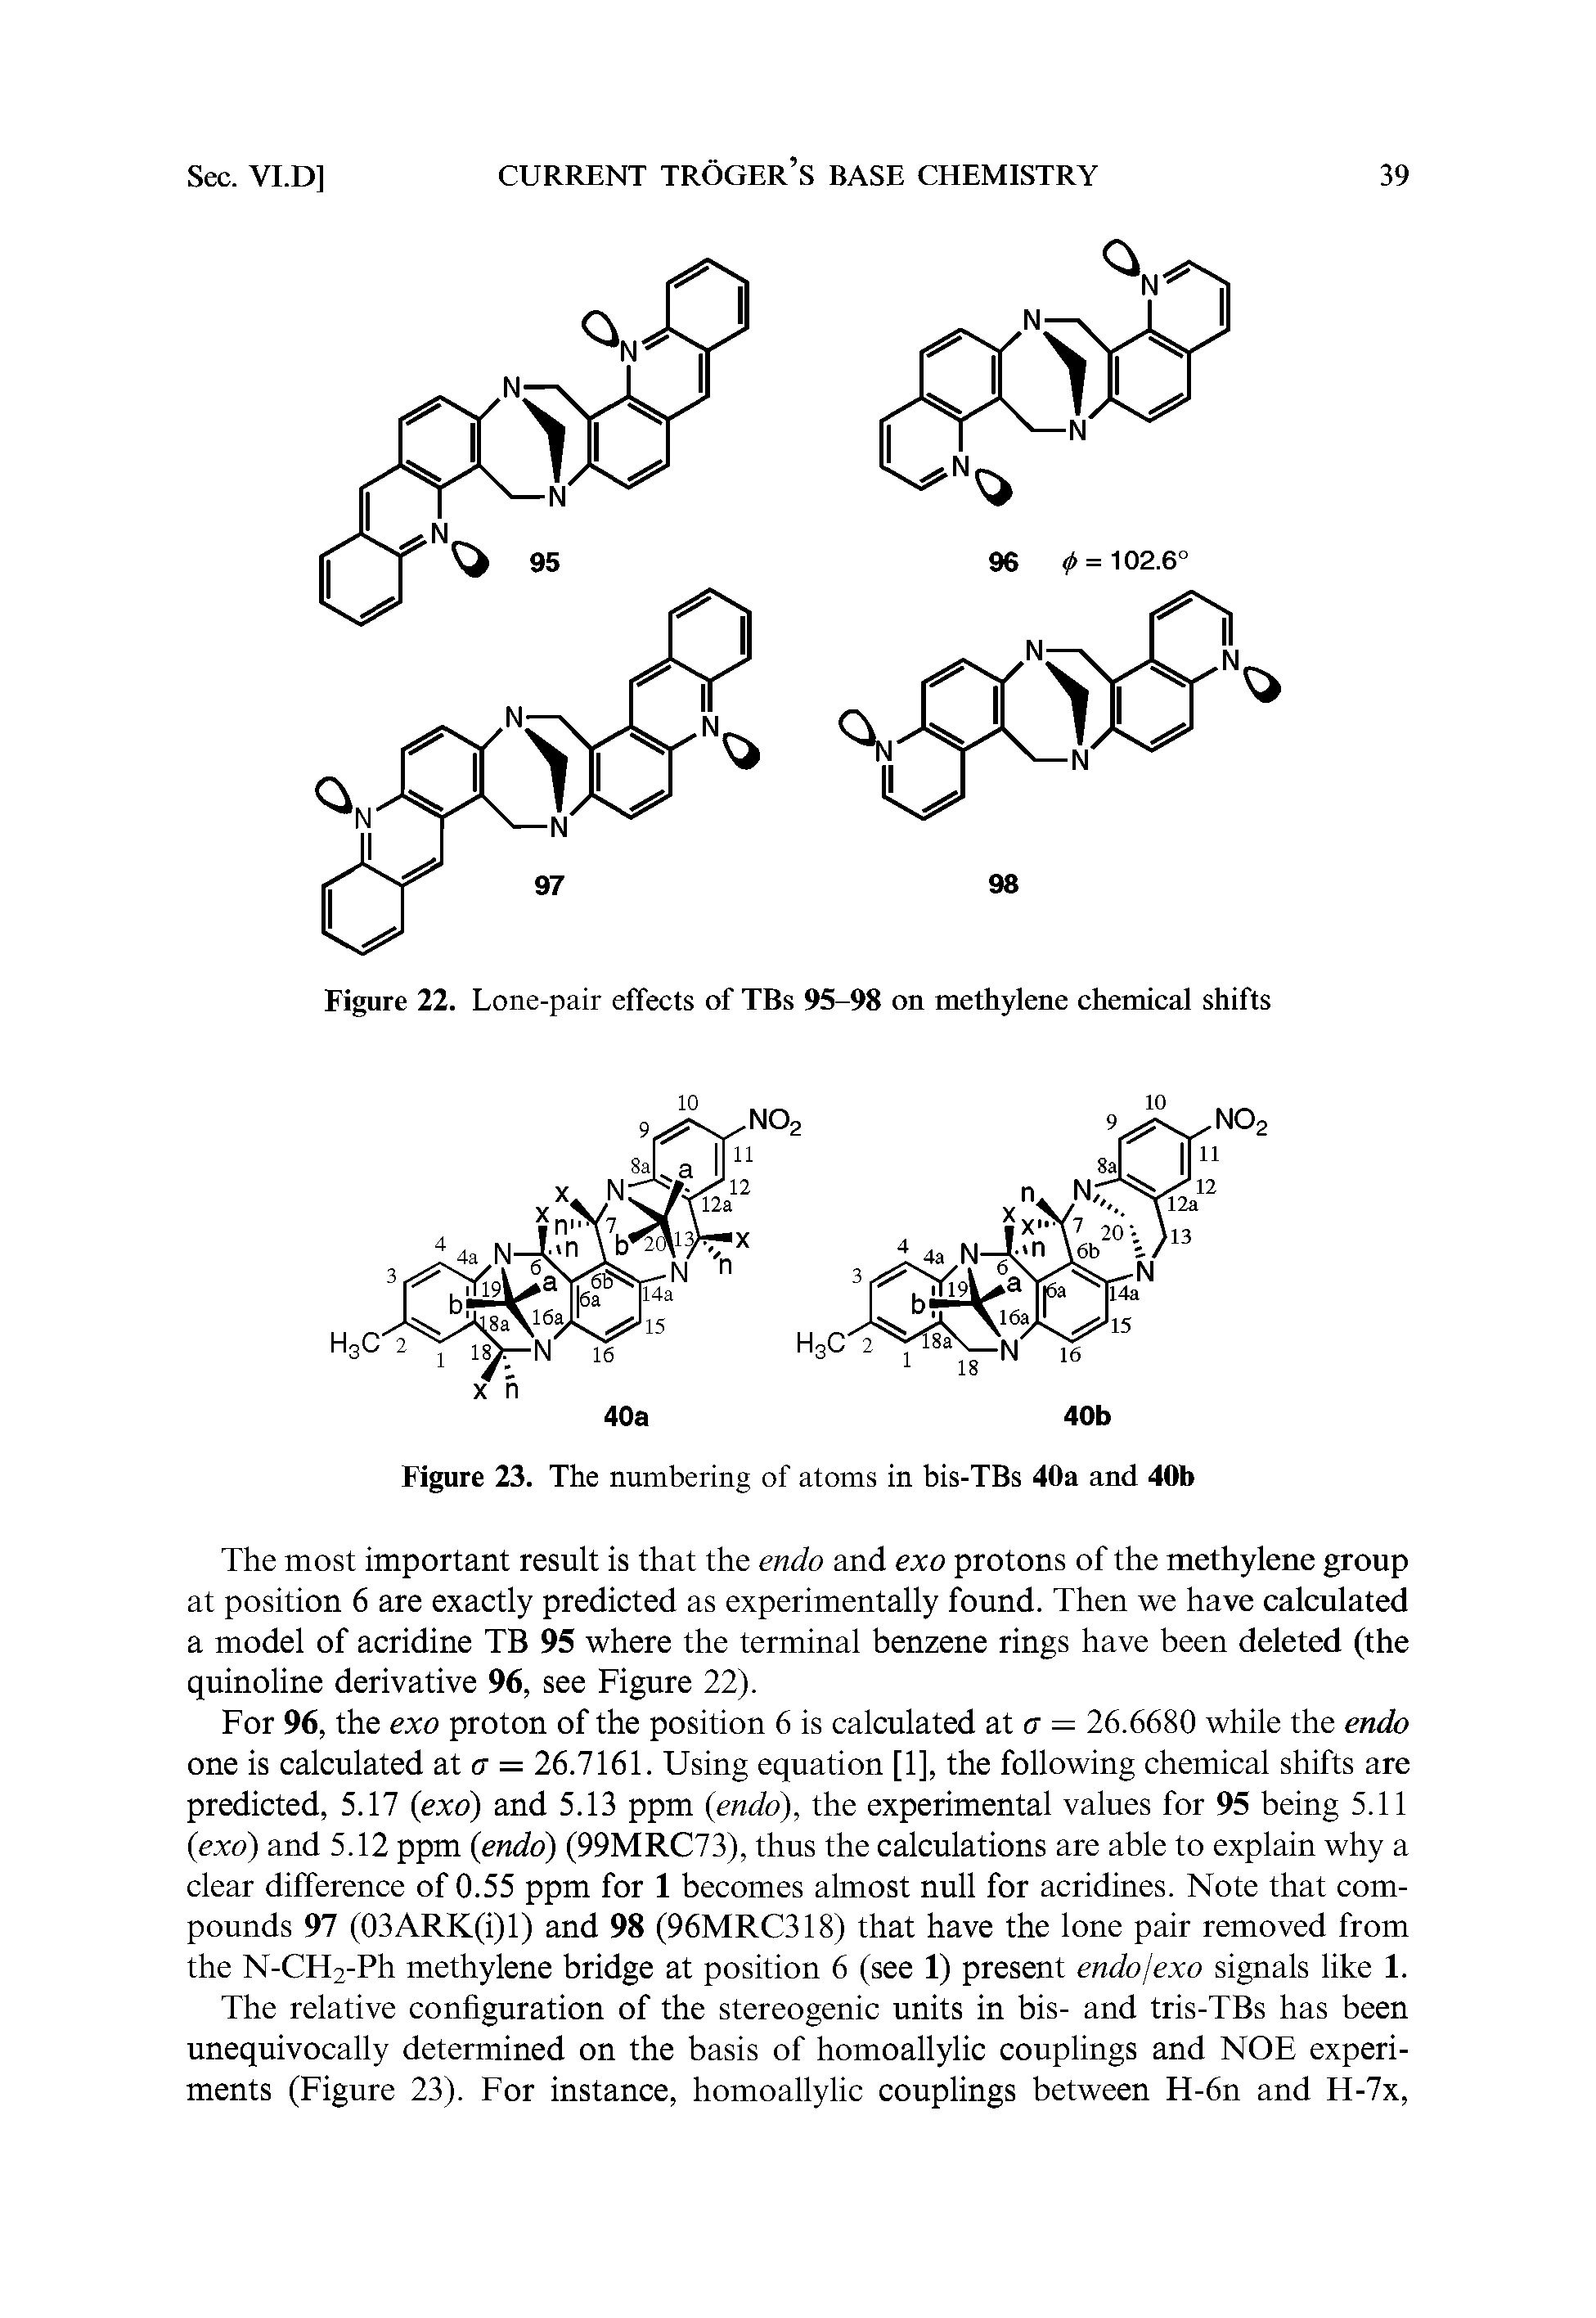 Figure 22. Lone-pair effects of TBs 95-98 on methylene chemical shifts...